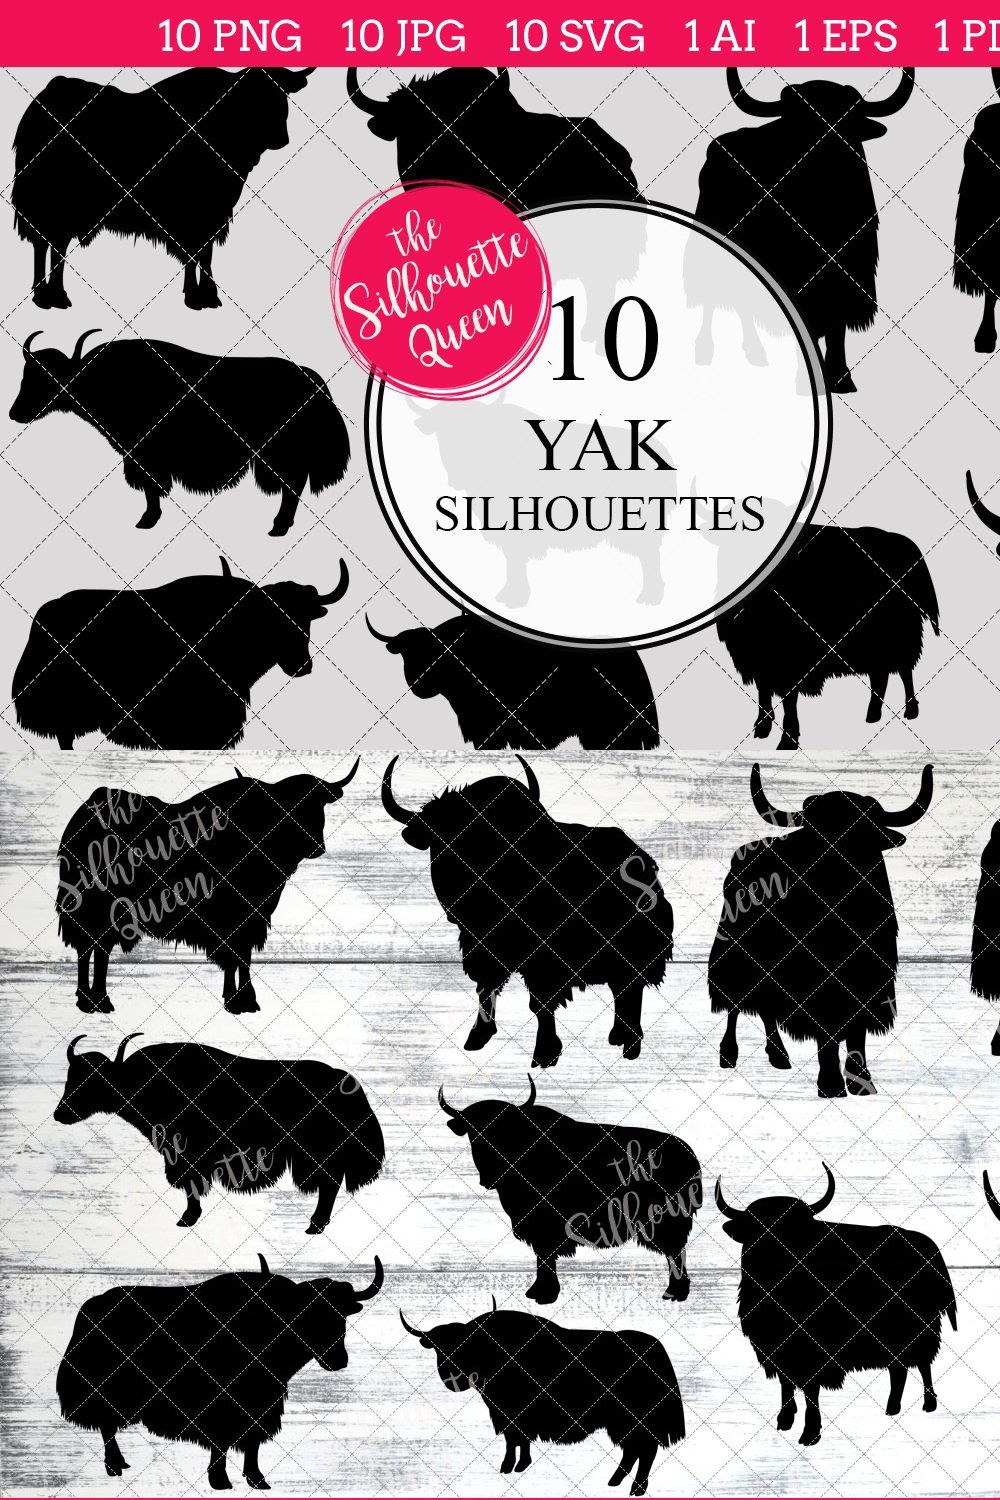 Yak silhouette vector graphics pinterest preview image.